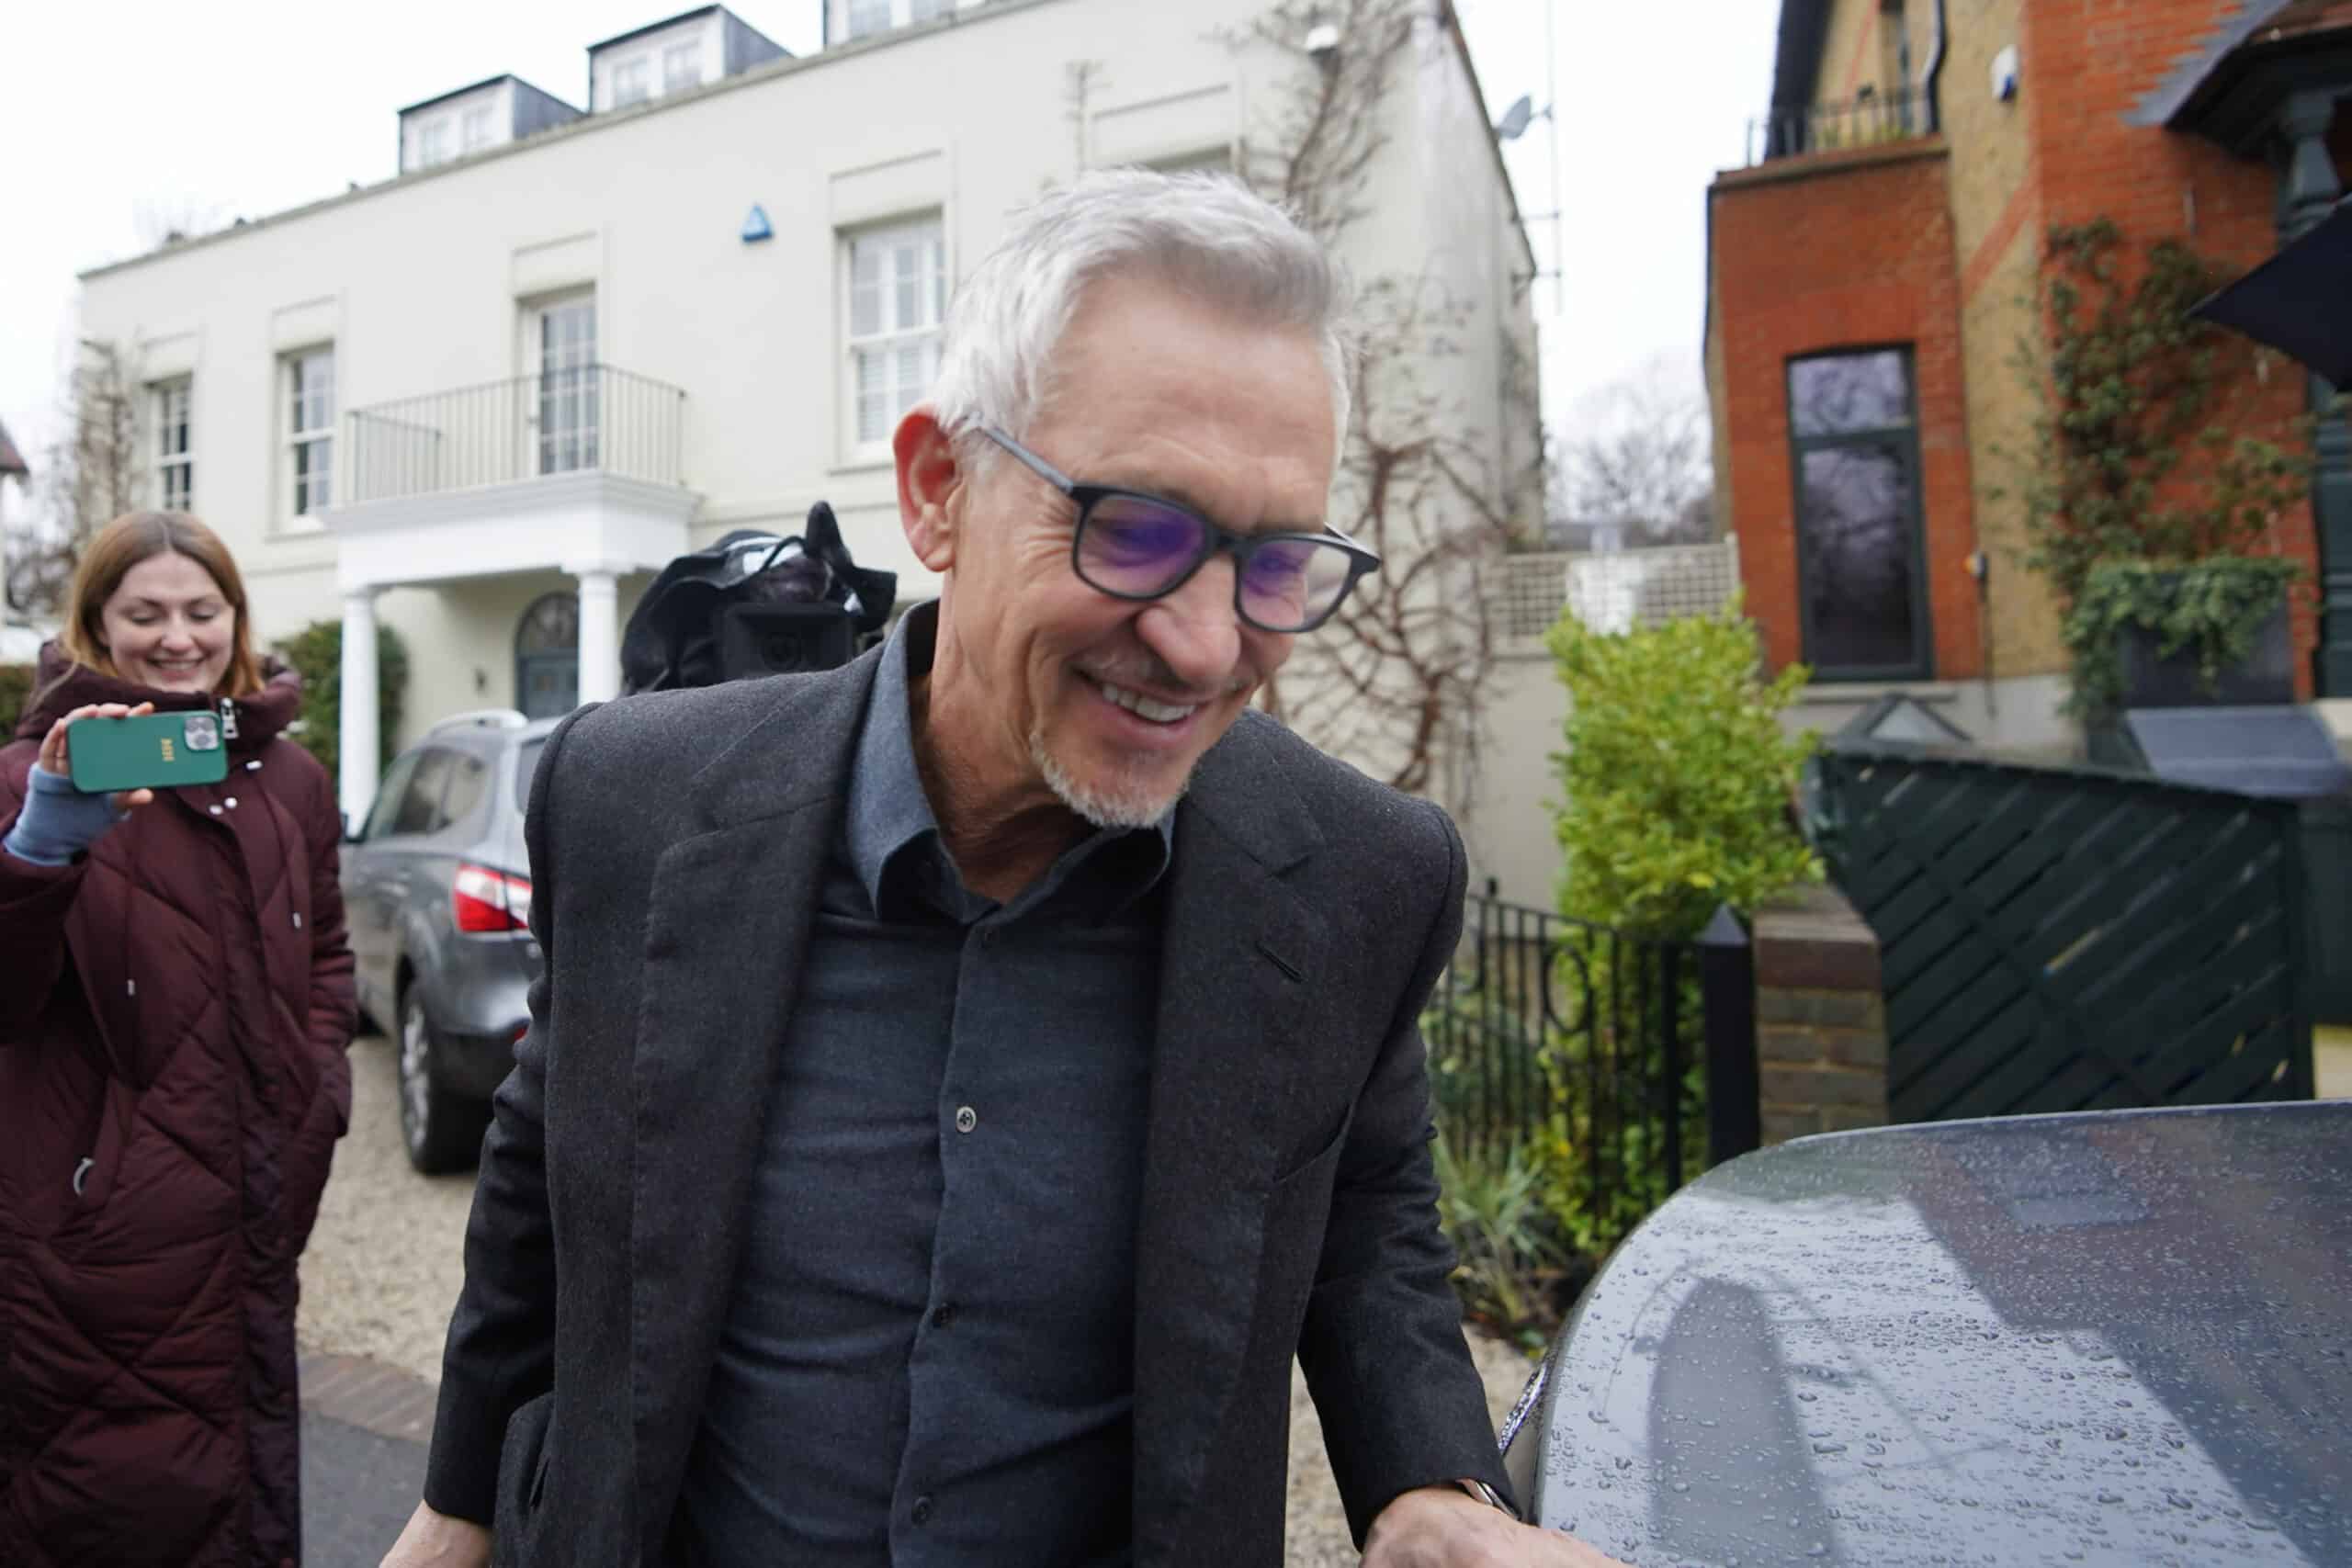 Refugee taken in by Gary Lineker tells all about living with the BBC presenter